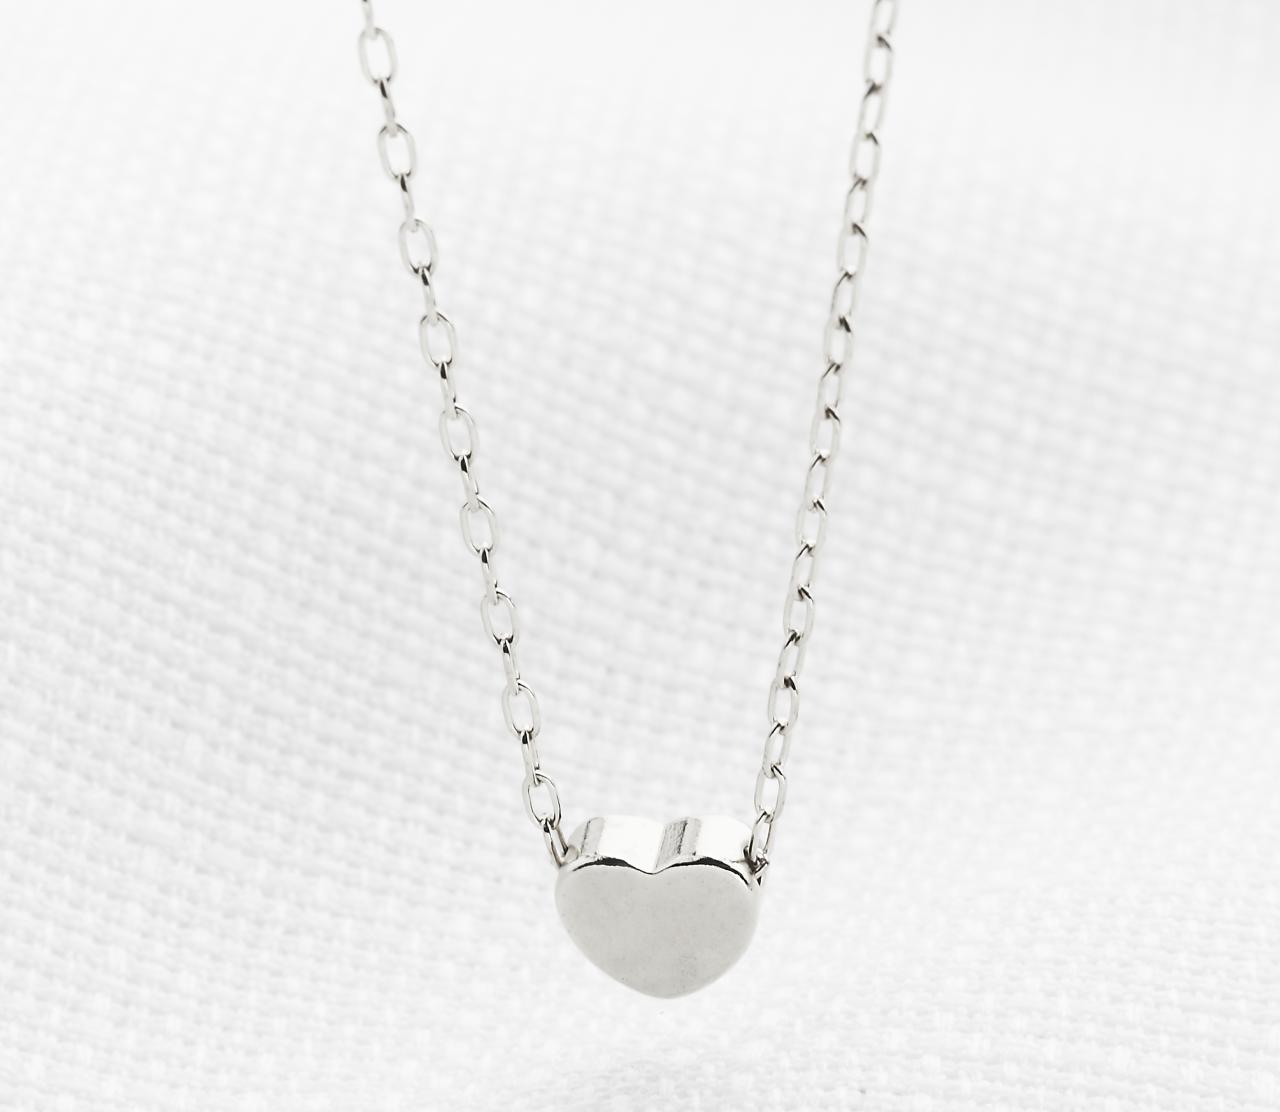 Silver Necklace - Tiny Heart Necklace, Simple Small Heart Necklace, Little Silver Heart, Silver Jewelry